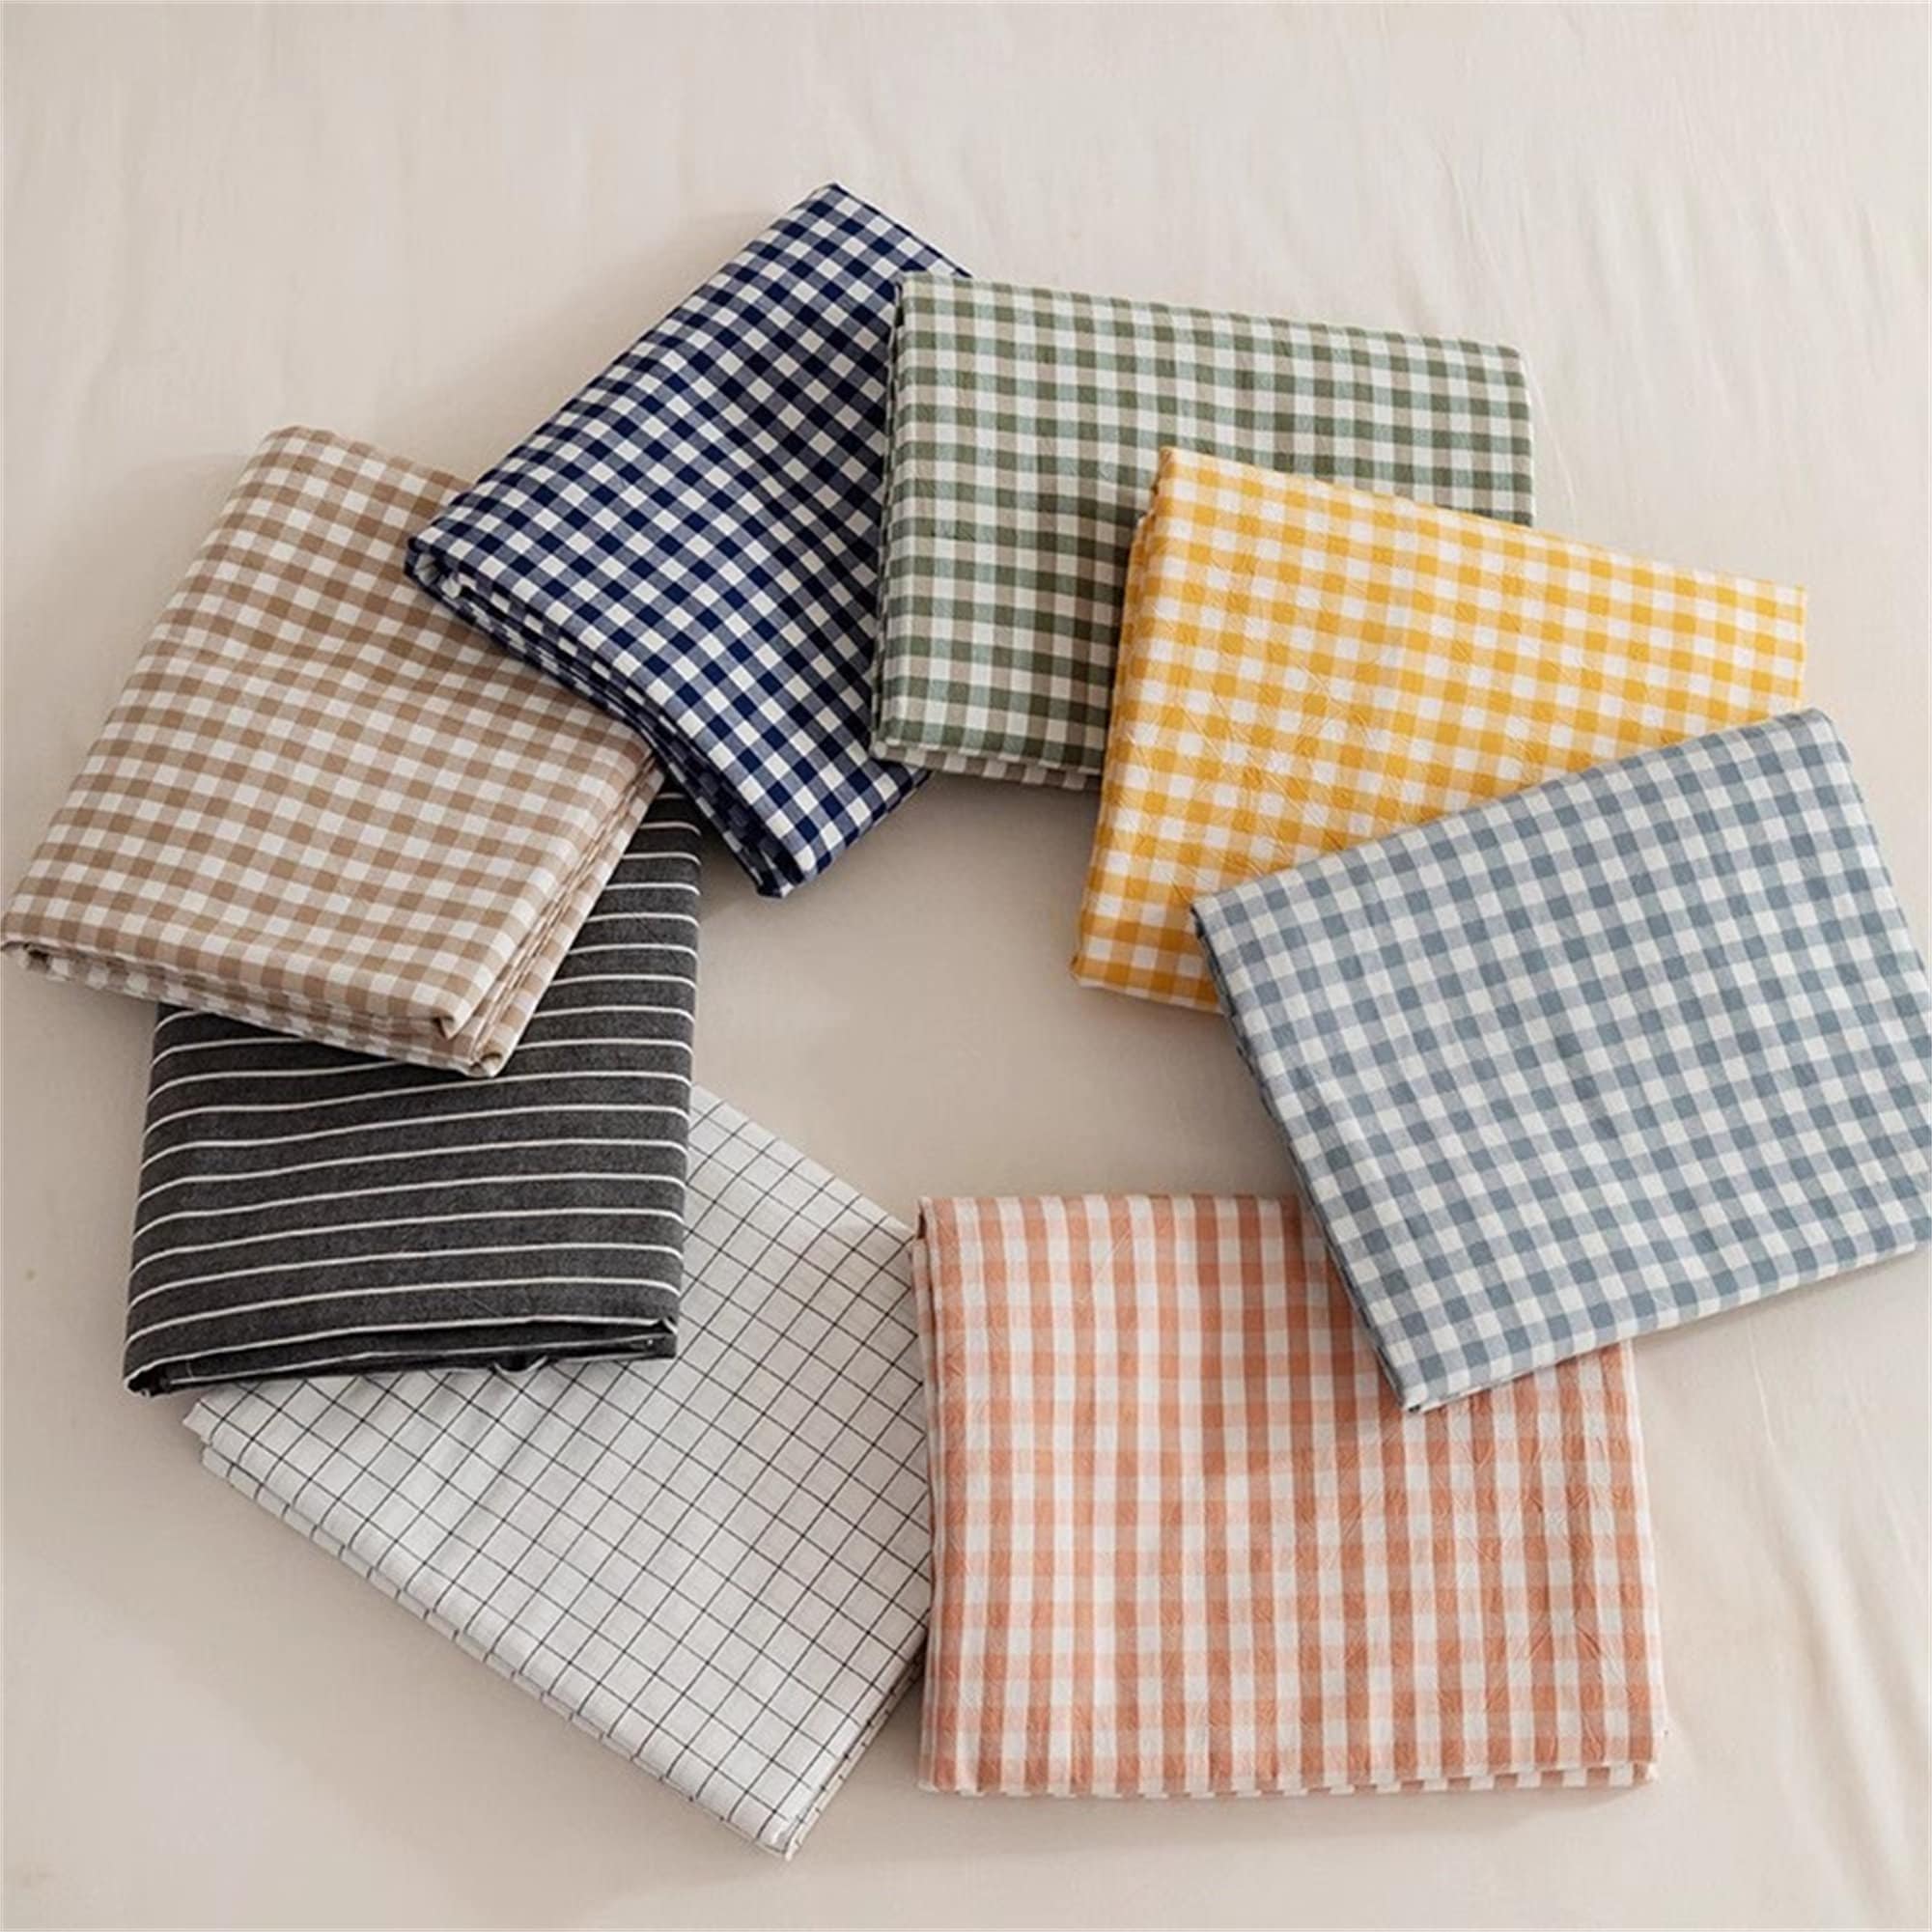 Nordic Luxury Duvet Cover Bed Linens Pillowcase 100% Cotton Fitted Bed  Sheet Set Cute Plaid Comforter Quilt Covers Bedspreads - AliExpress